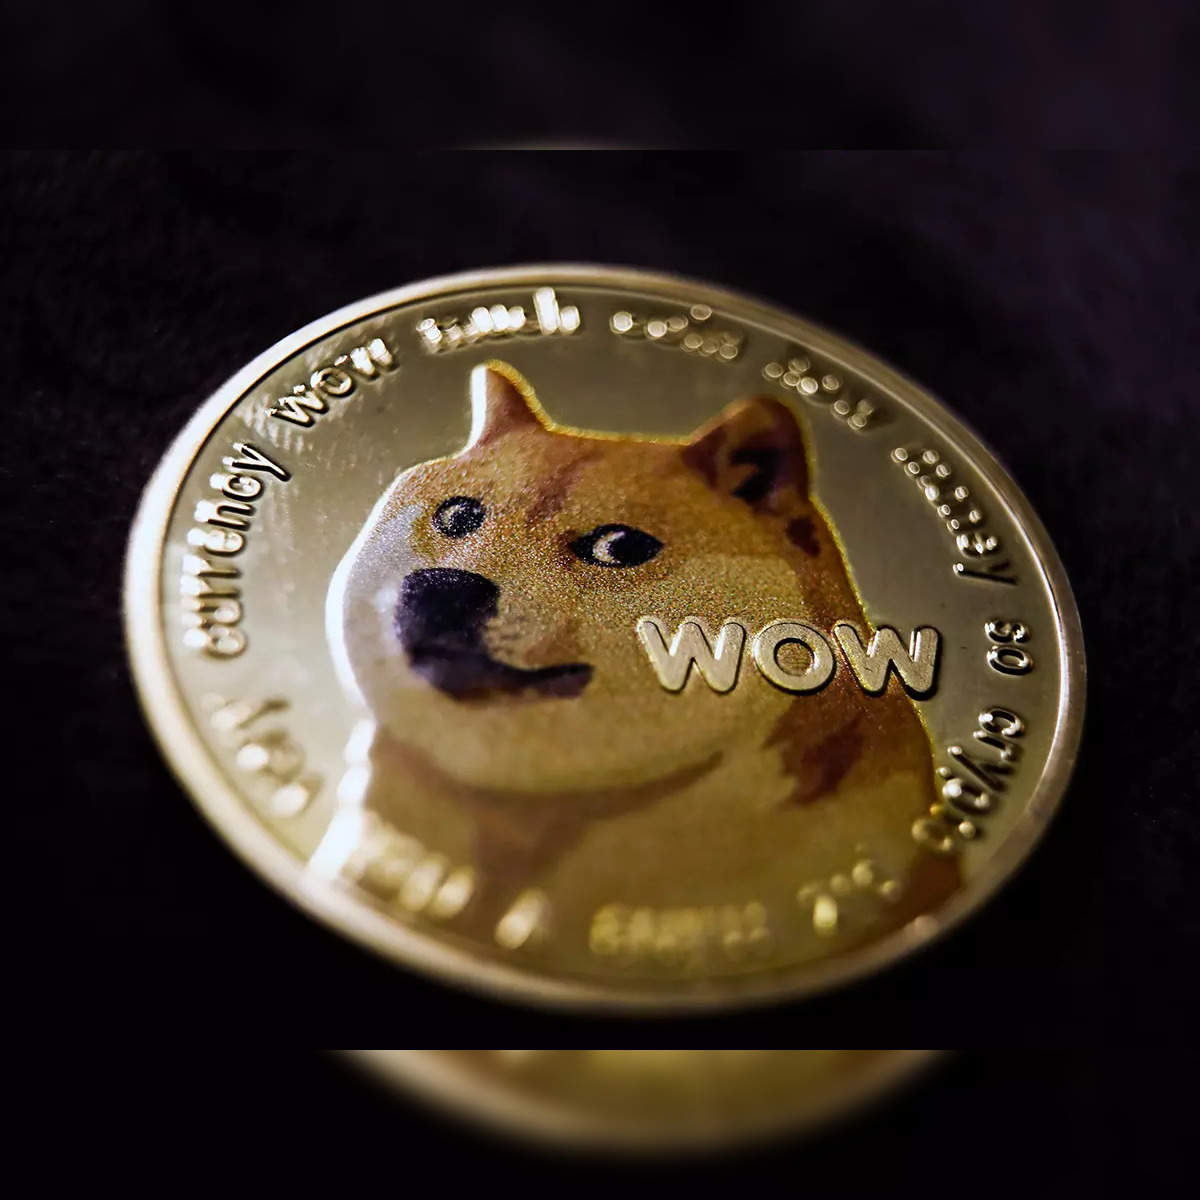 PEPE Becomes Third-Largest Meme Coin, Outperforms DOGE, SHIB